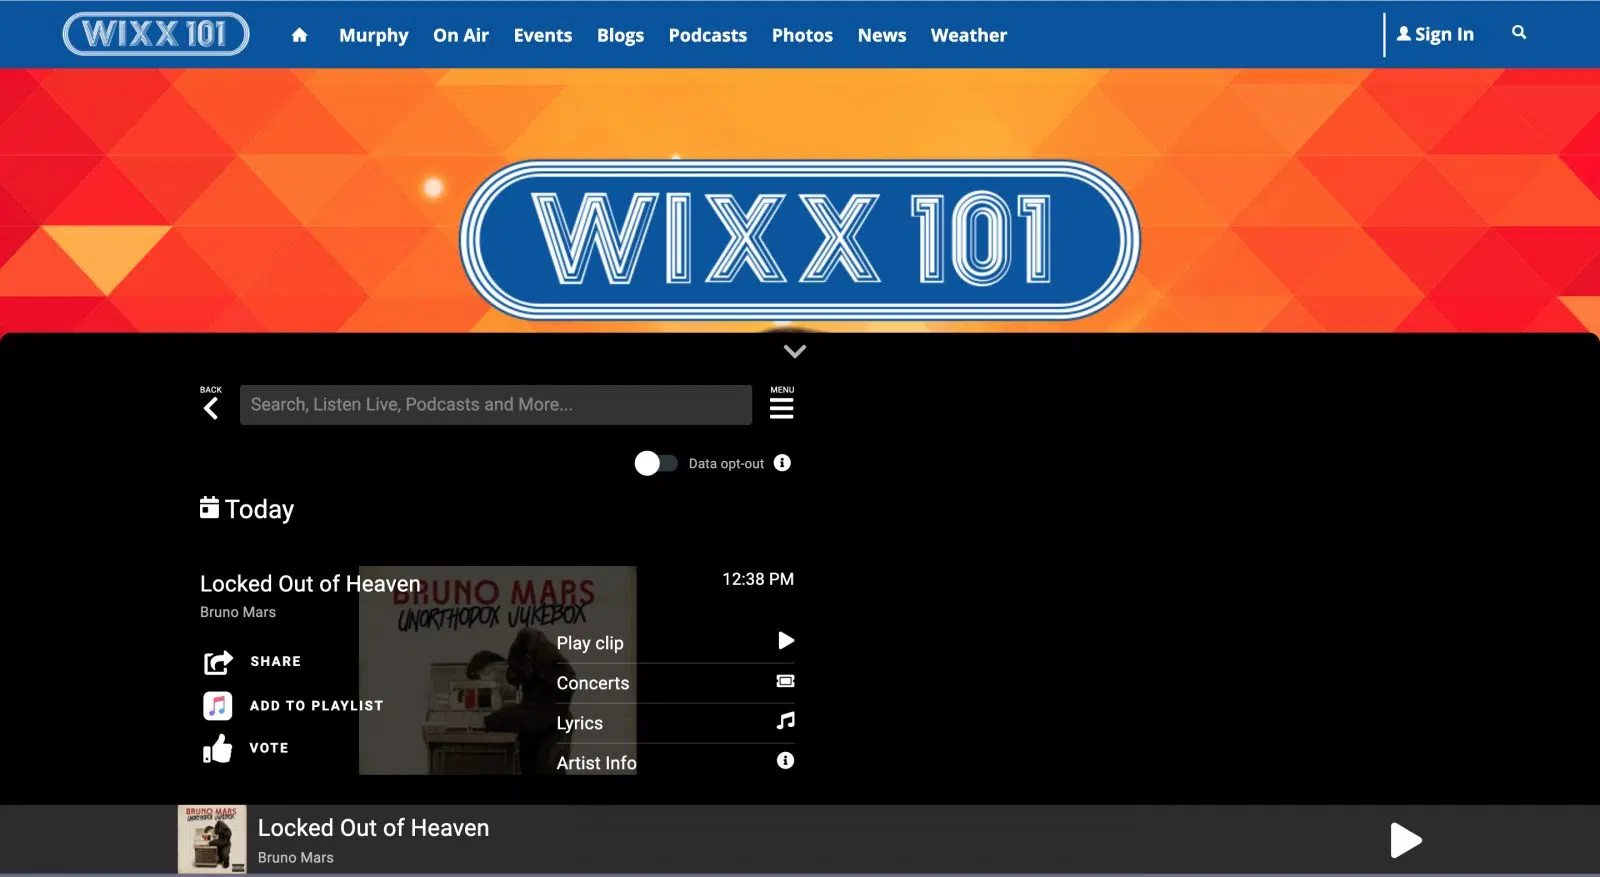 101.1 WIXX was my favorite radio station while living in Green Bay